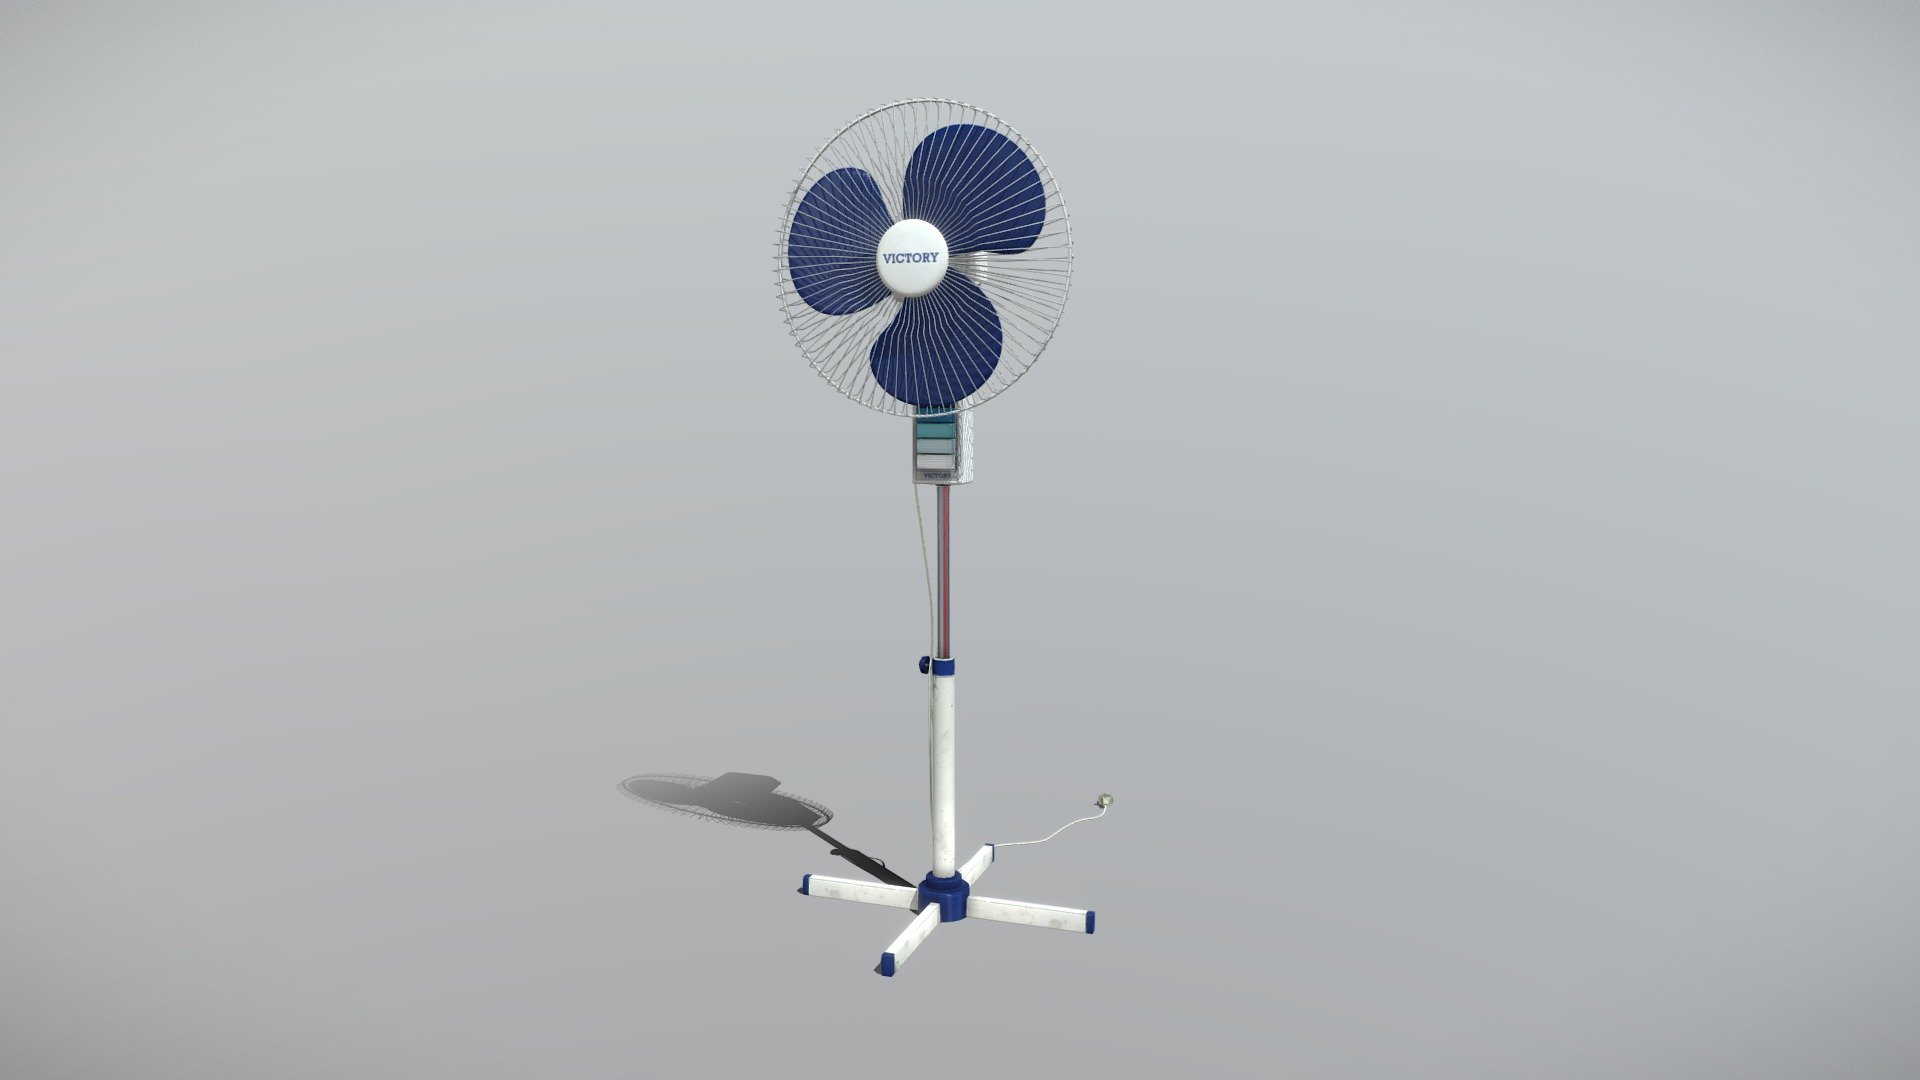 Such fan currently stand in my garage, so it was be of my reference for this asset. Original was designed in Japan of 1993 and it still in good condition.

Textures in 4096px - Albedo, AO, Metalness, Normal, Roughness. 
Two separated animations - for the paddles and for the head of fan.
Some parts of the mesh have UVs overlapping for to save texture space (paddles, metal grid and legs) 3d model